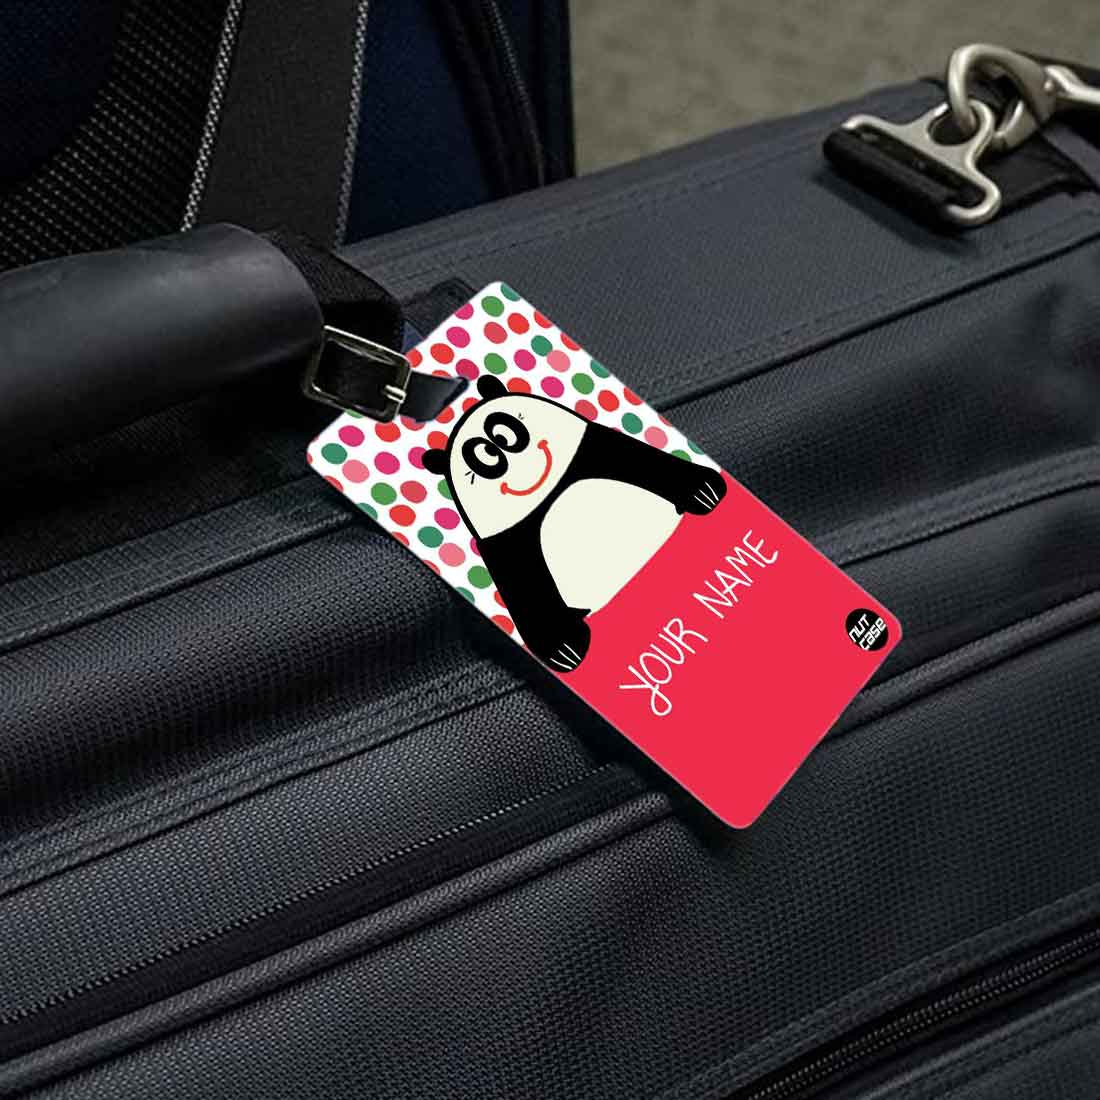 Personalised Travel Luggage Tags Add Your Name Set of 2 - Panda